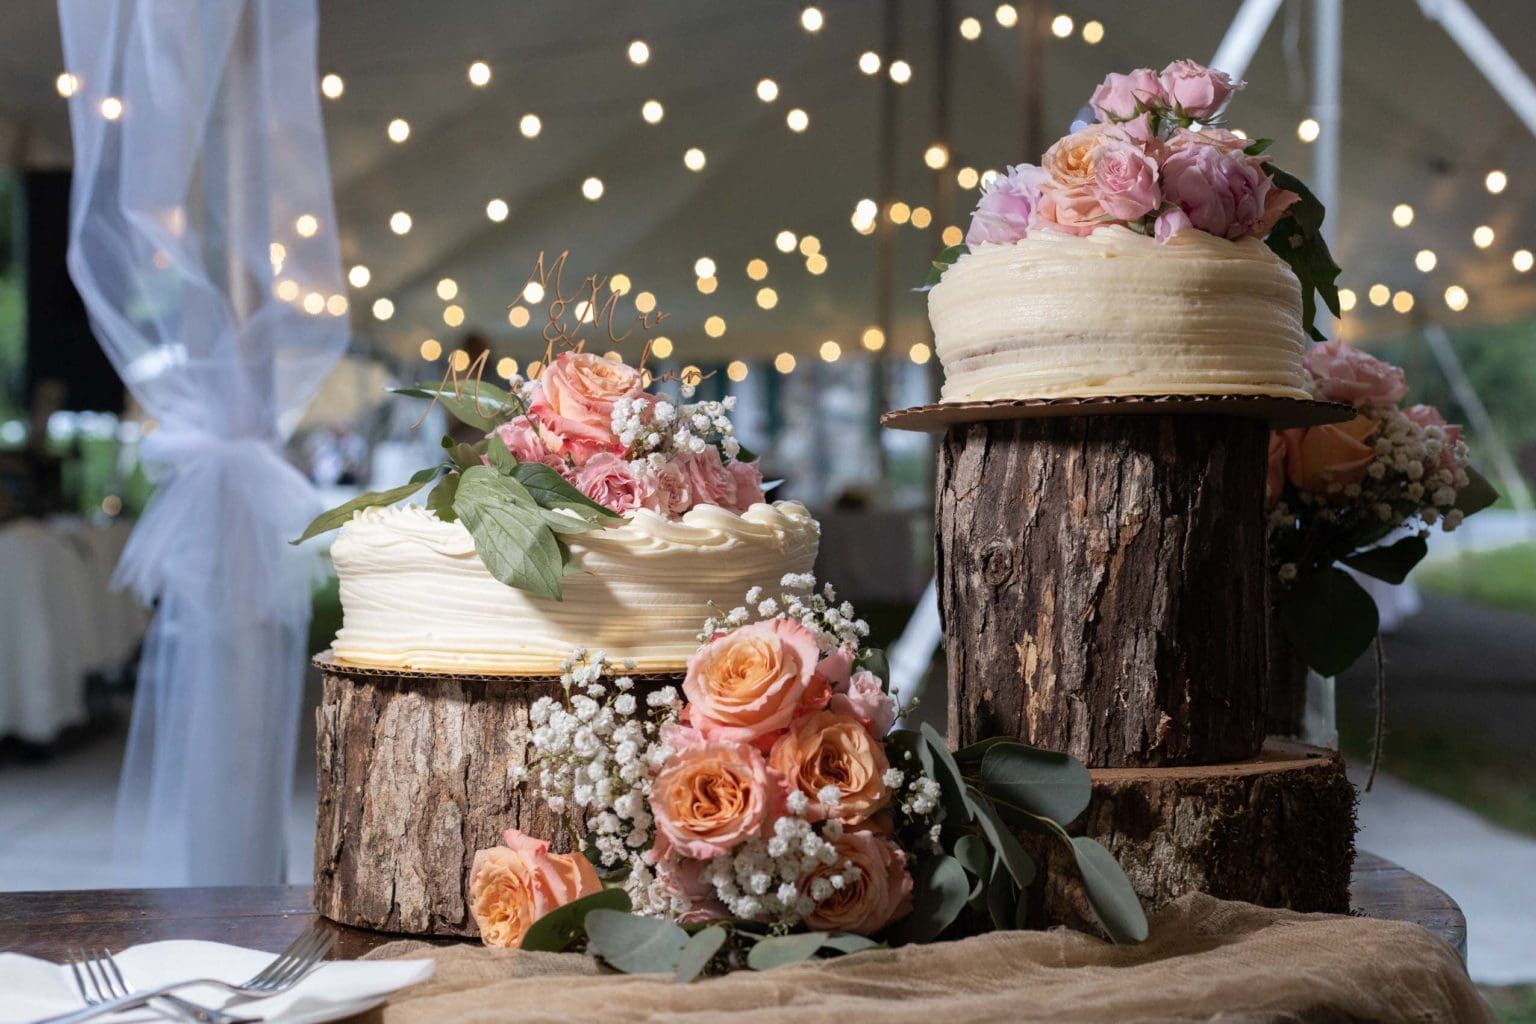 Three wedding cakes are sitting on wooden stump slices on a table.